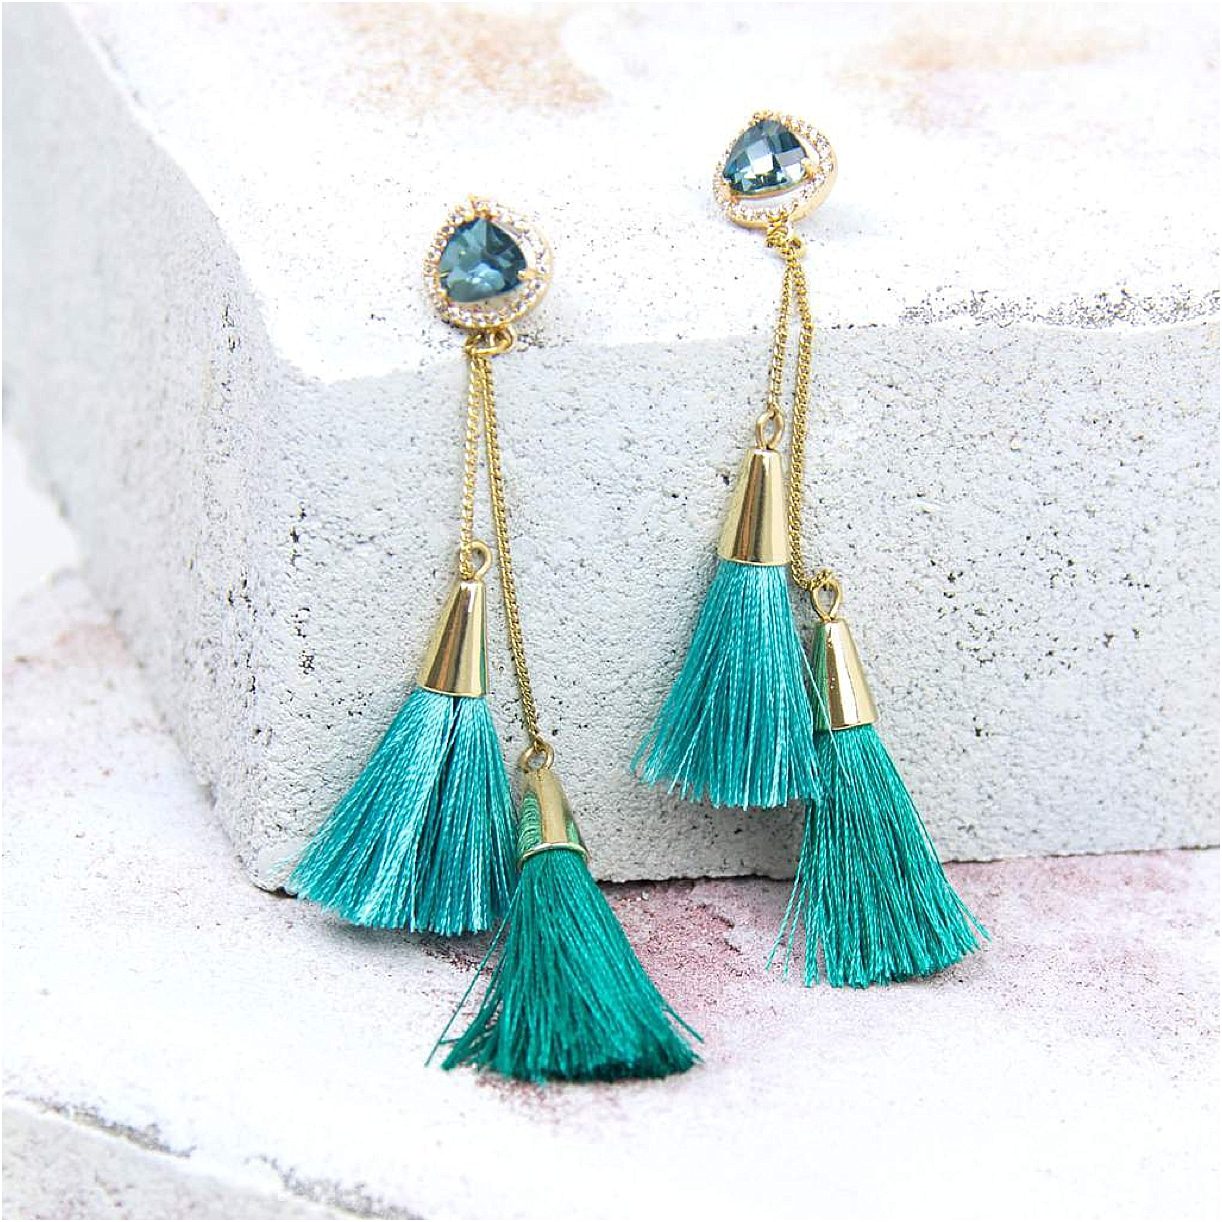 Bridesmaid Jewelry Ideas from Violet and Brooks as seen on Hill City Bride Virginia Wedding Blog - tassel earrings